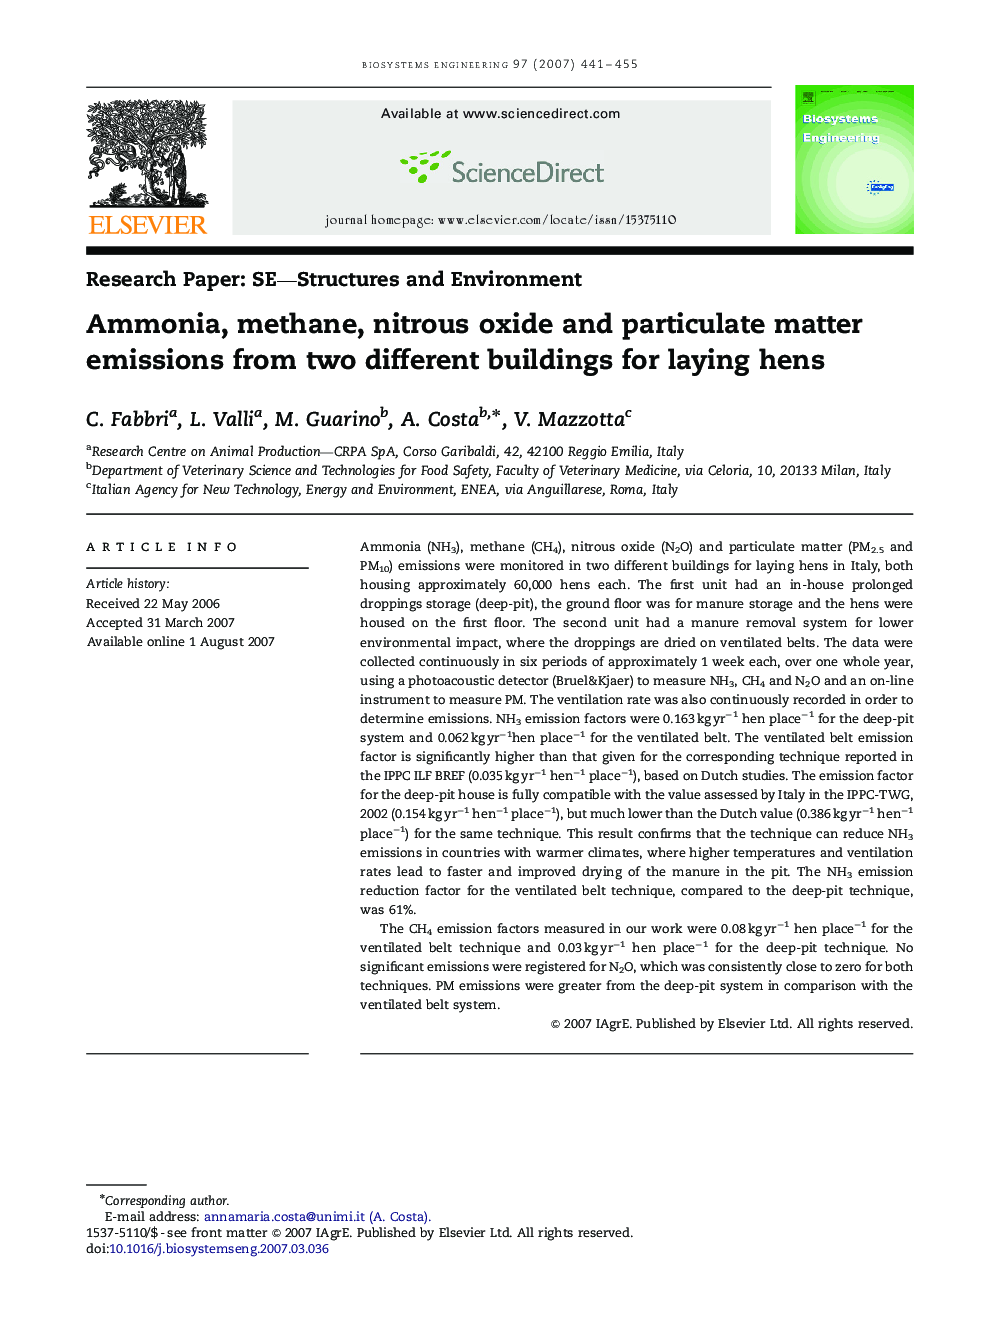 Ammonia, methane, nitrous oxide and particulate matter emissions from two different buildings for laying hens